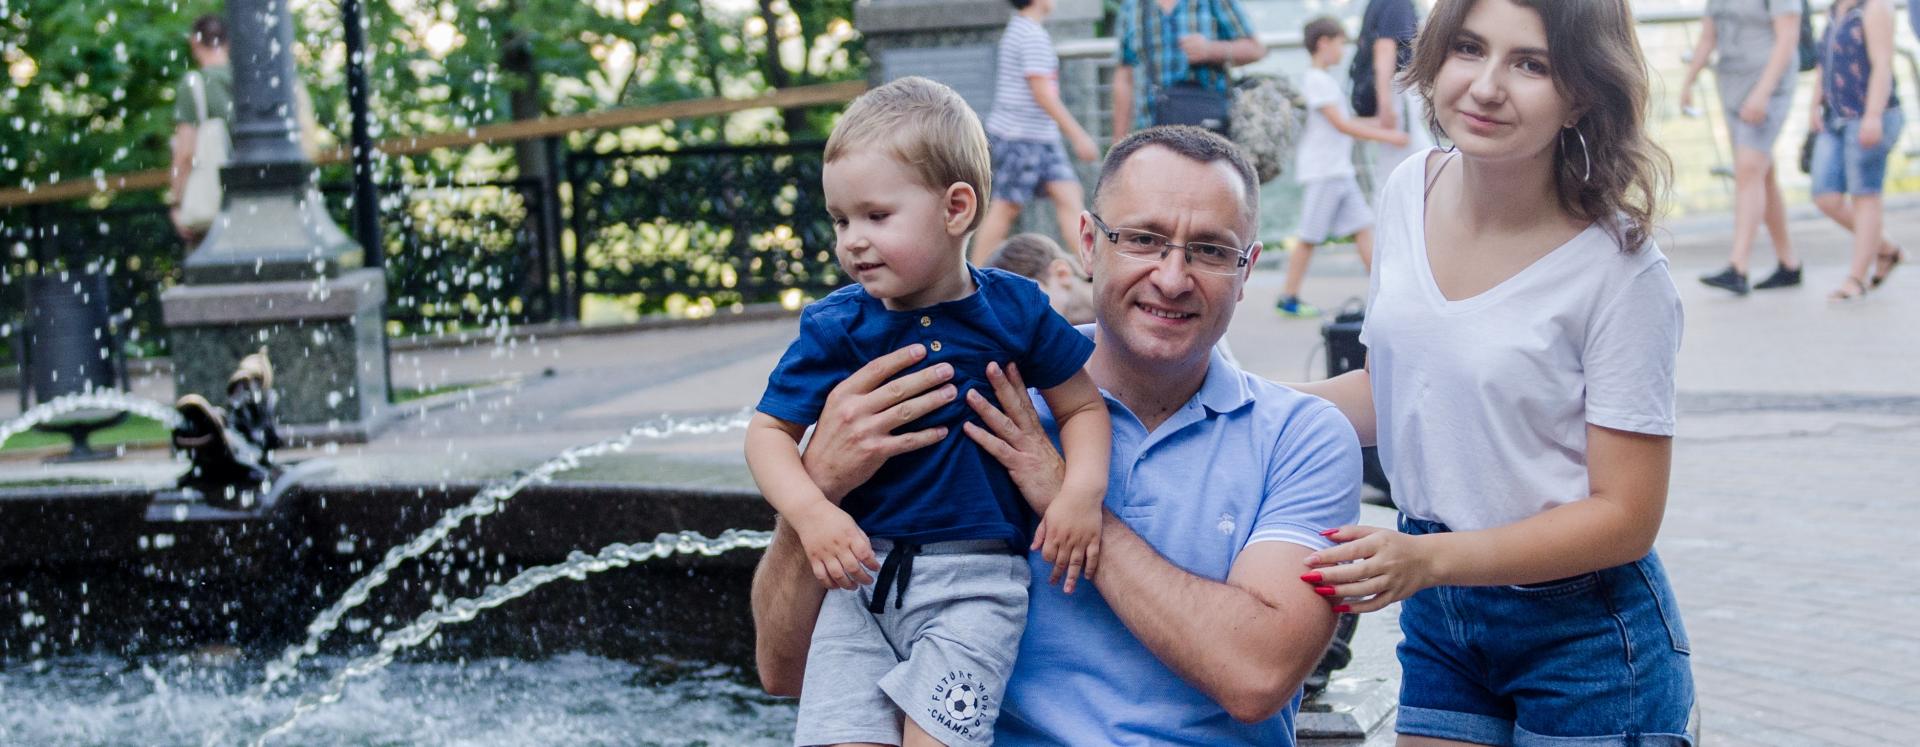 Vasyl Myroshnychenko Sitting By Fountain Holding Son In his Hands With Daughter Beside Him